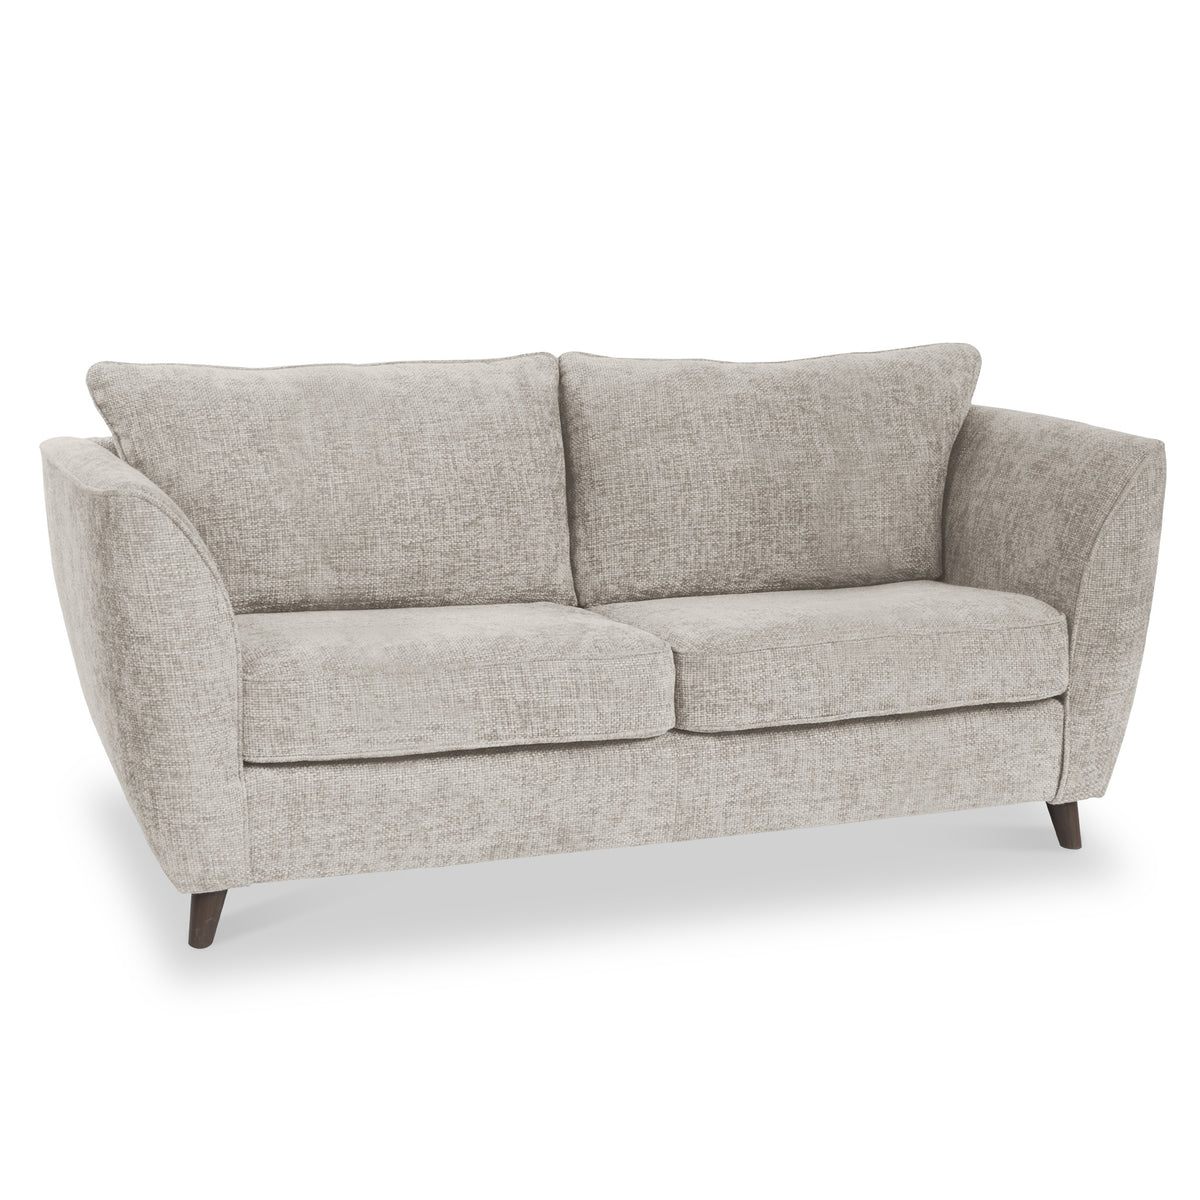 Tamsin Stone 3 Seater Sofa from Roseland Furniture